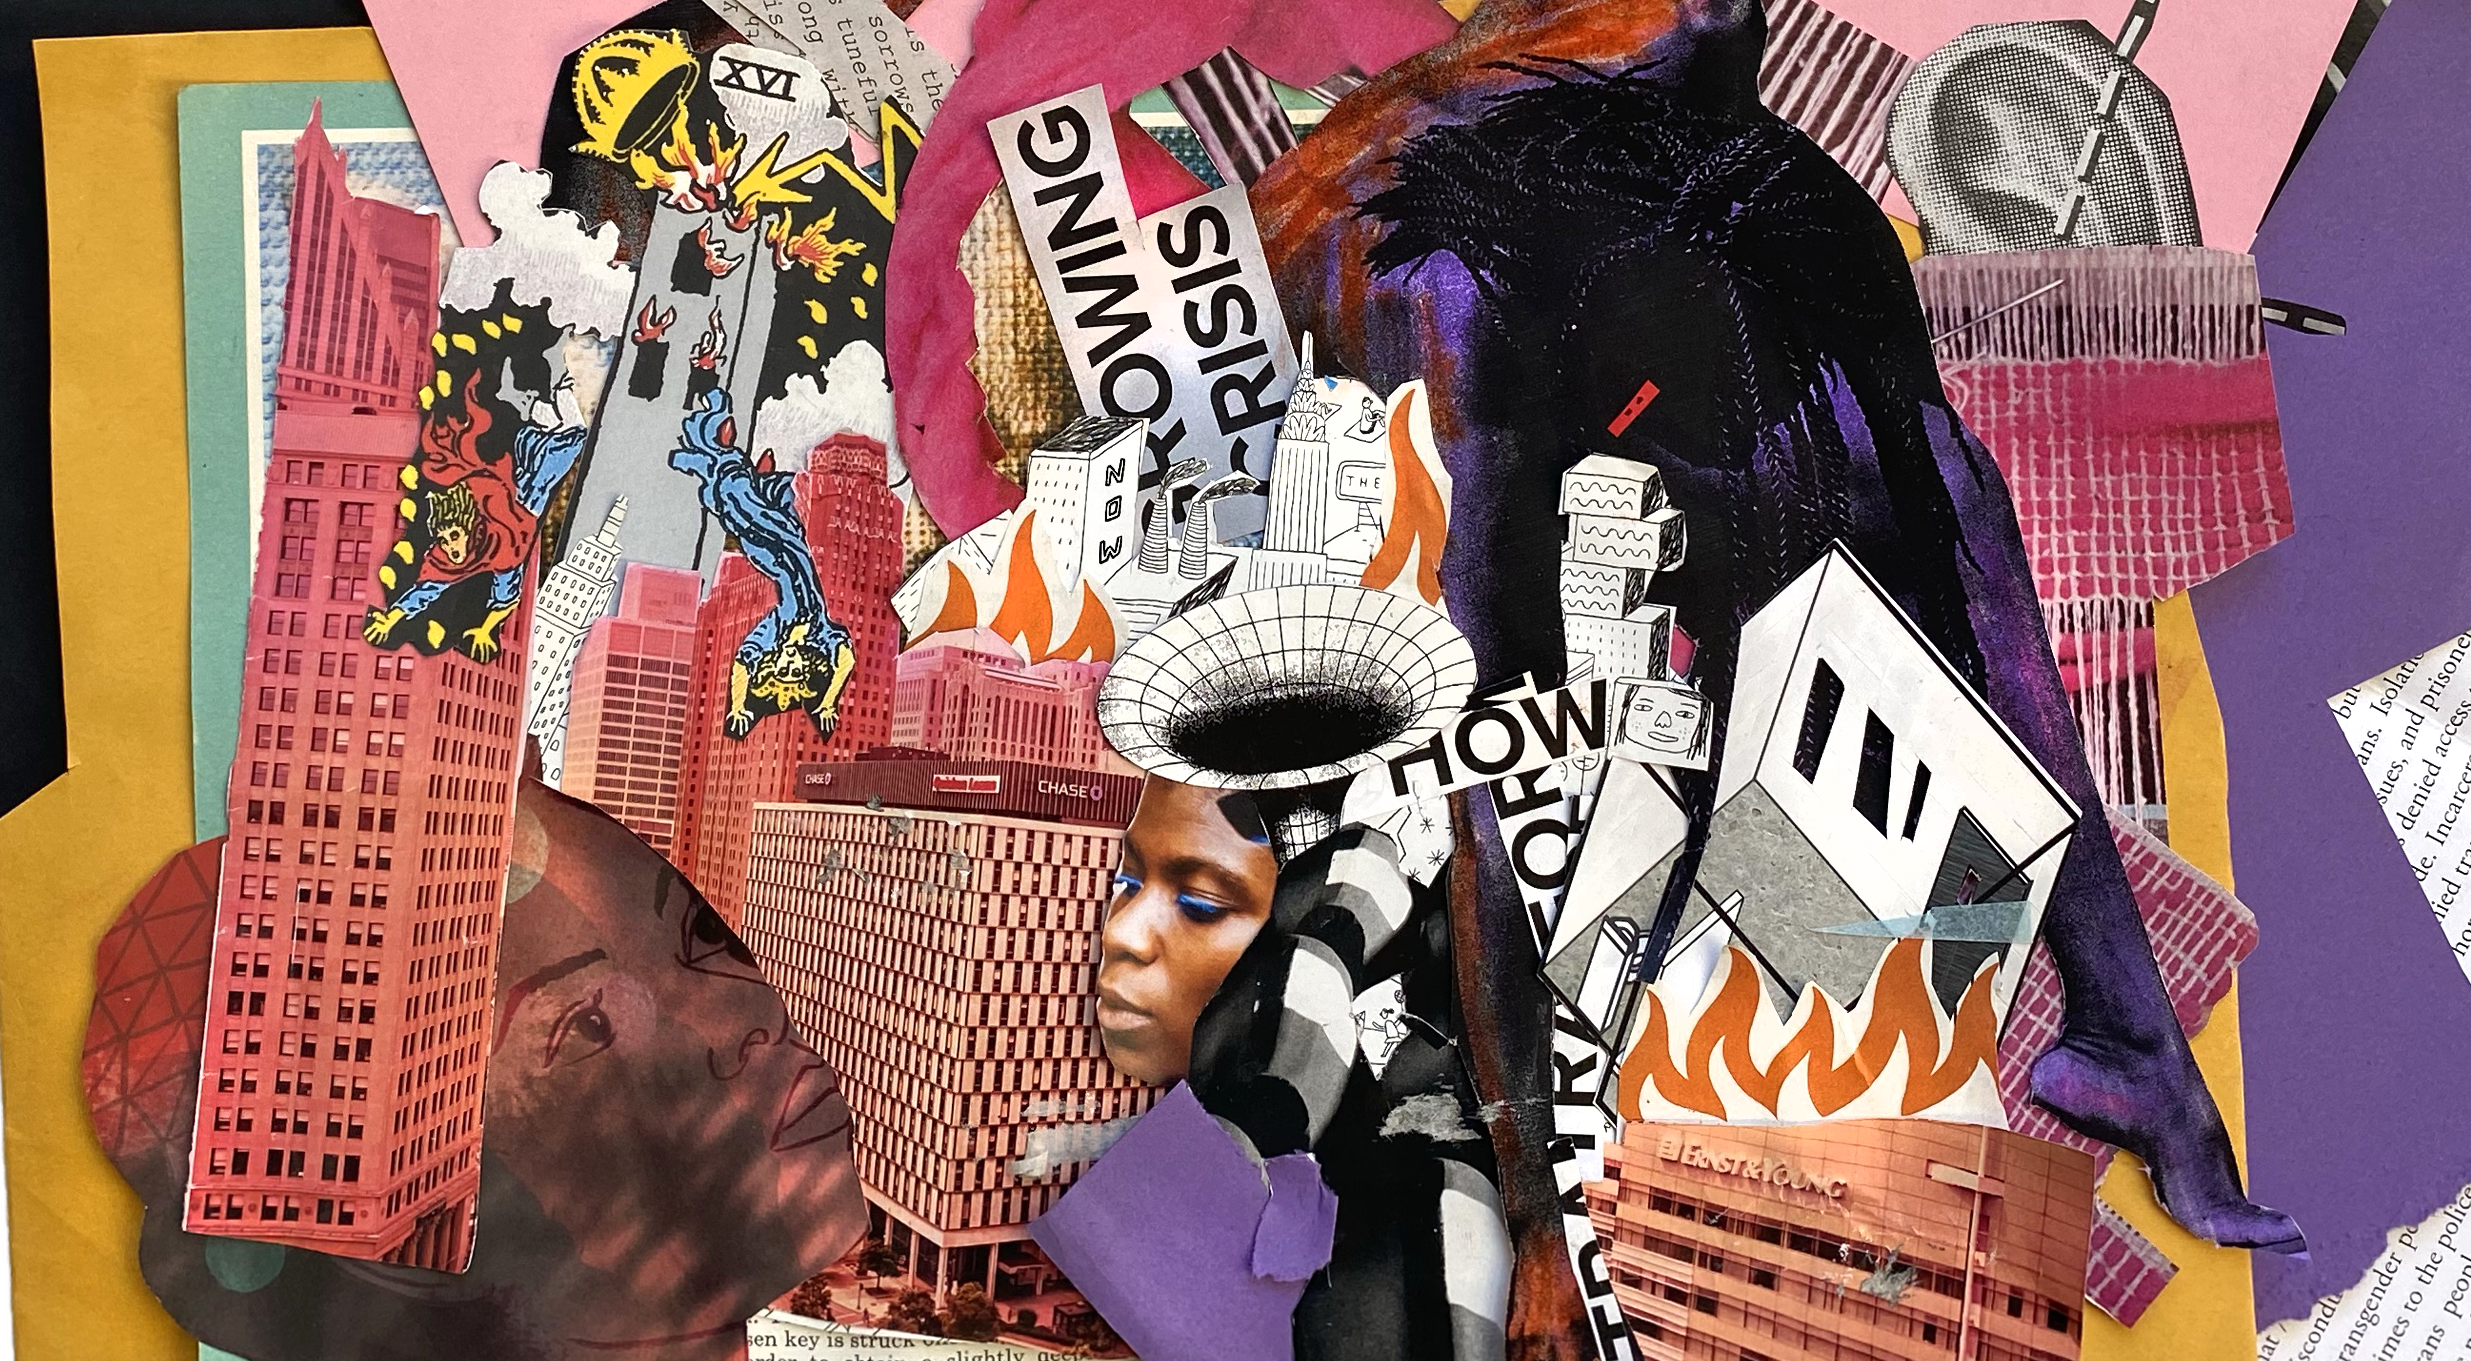 A chaotic asymmetrical Black Lives Matter zine collage showing scenes of urban struggle and rebirth, with references to police brutality against Black people and other histories of state violence. By Jonathan Valelly.